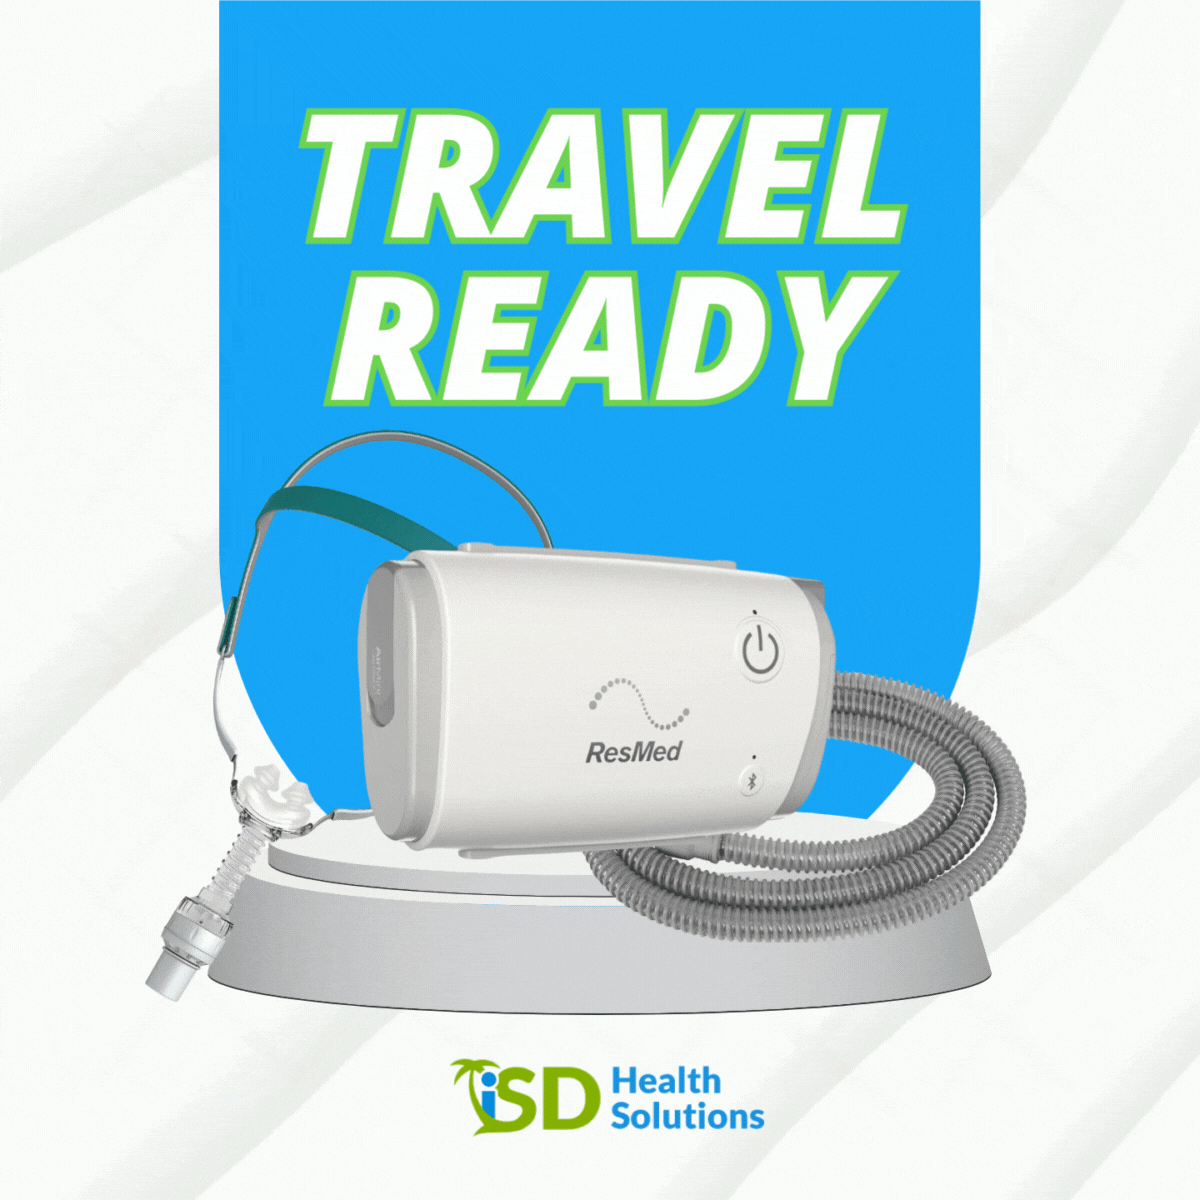 CPAP travel ready